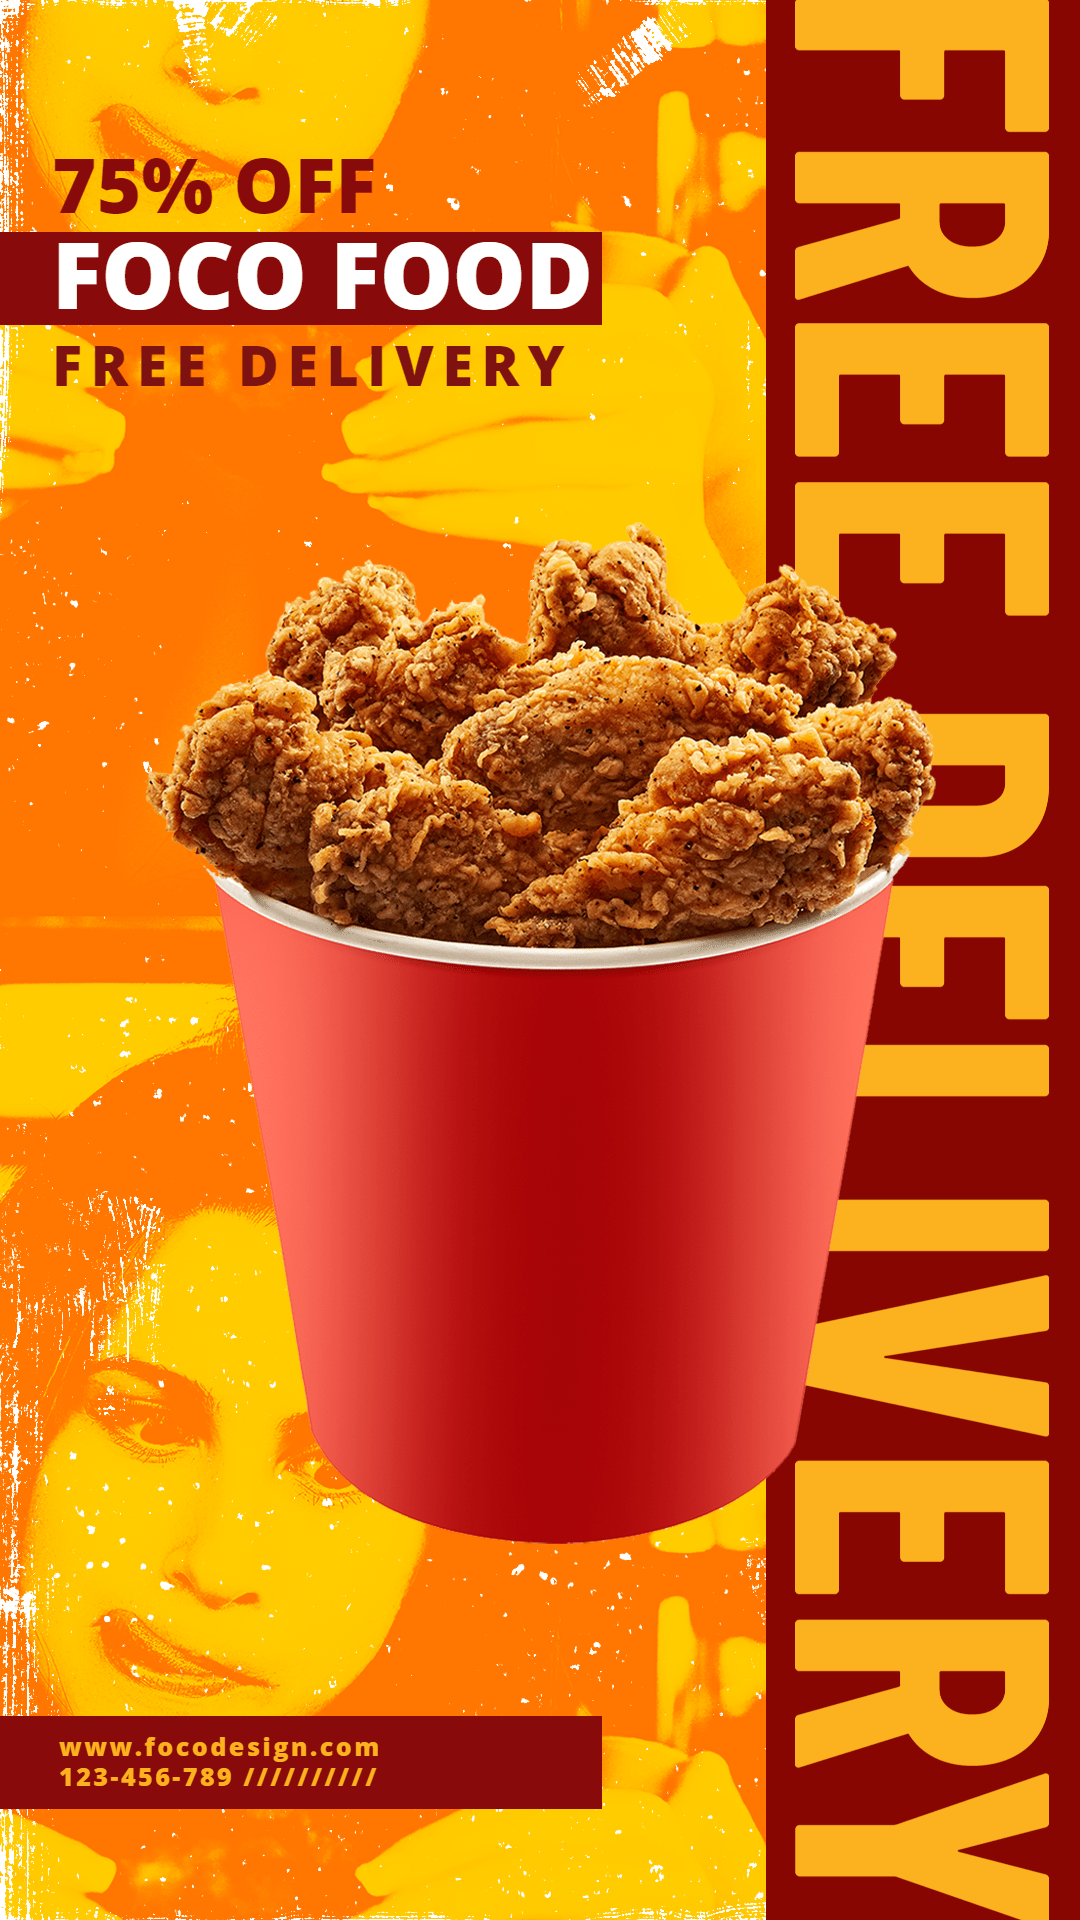 Fried Chicken Fast Food Free Delivery Discount Promo Print Advertising Ecommerce Story预览效果